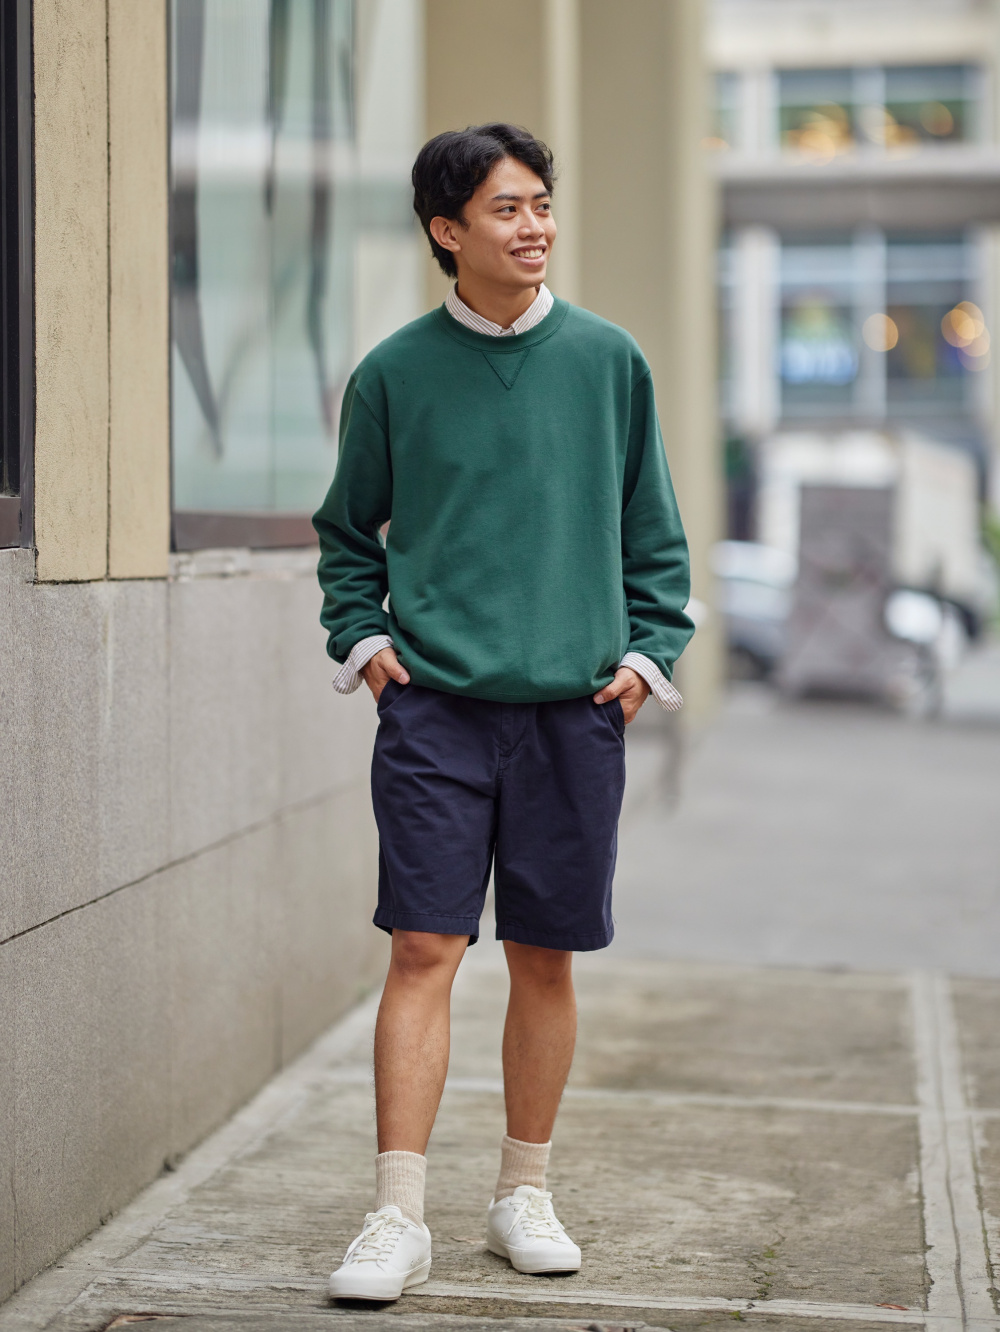 Check styling ideas for「Chino Shorts (length 21 - 25 cm)*、Round